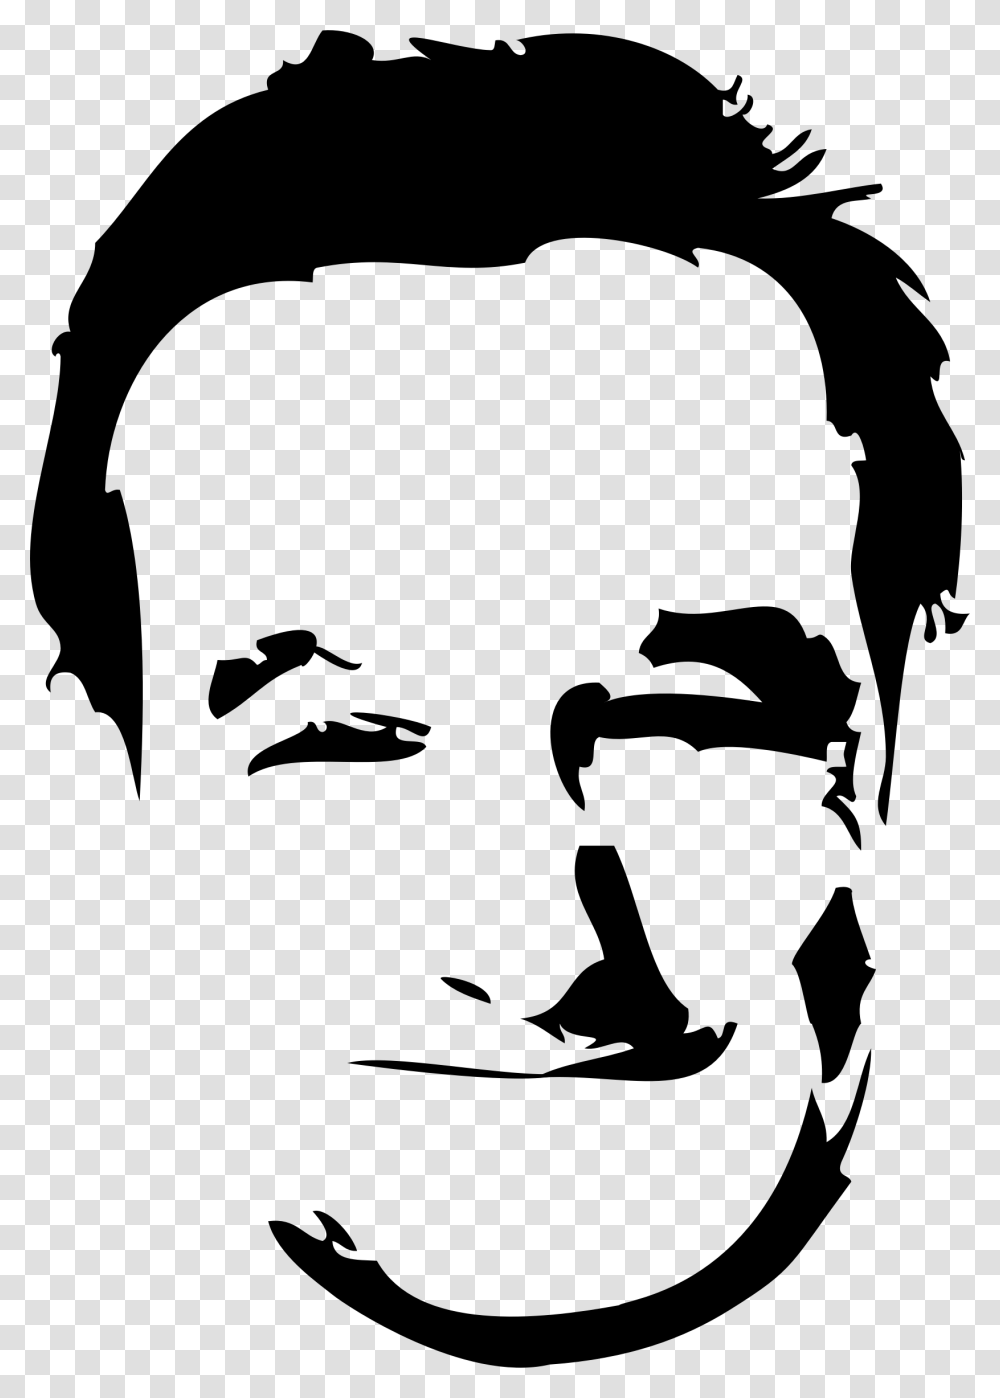 Robin Williams Drawing Outline Robin Williams Silhouette Print Transparent Png